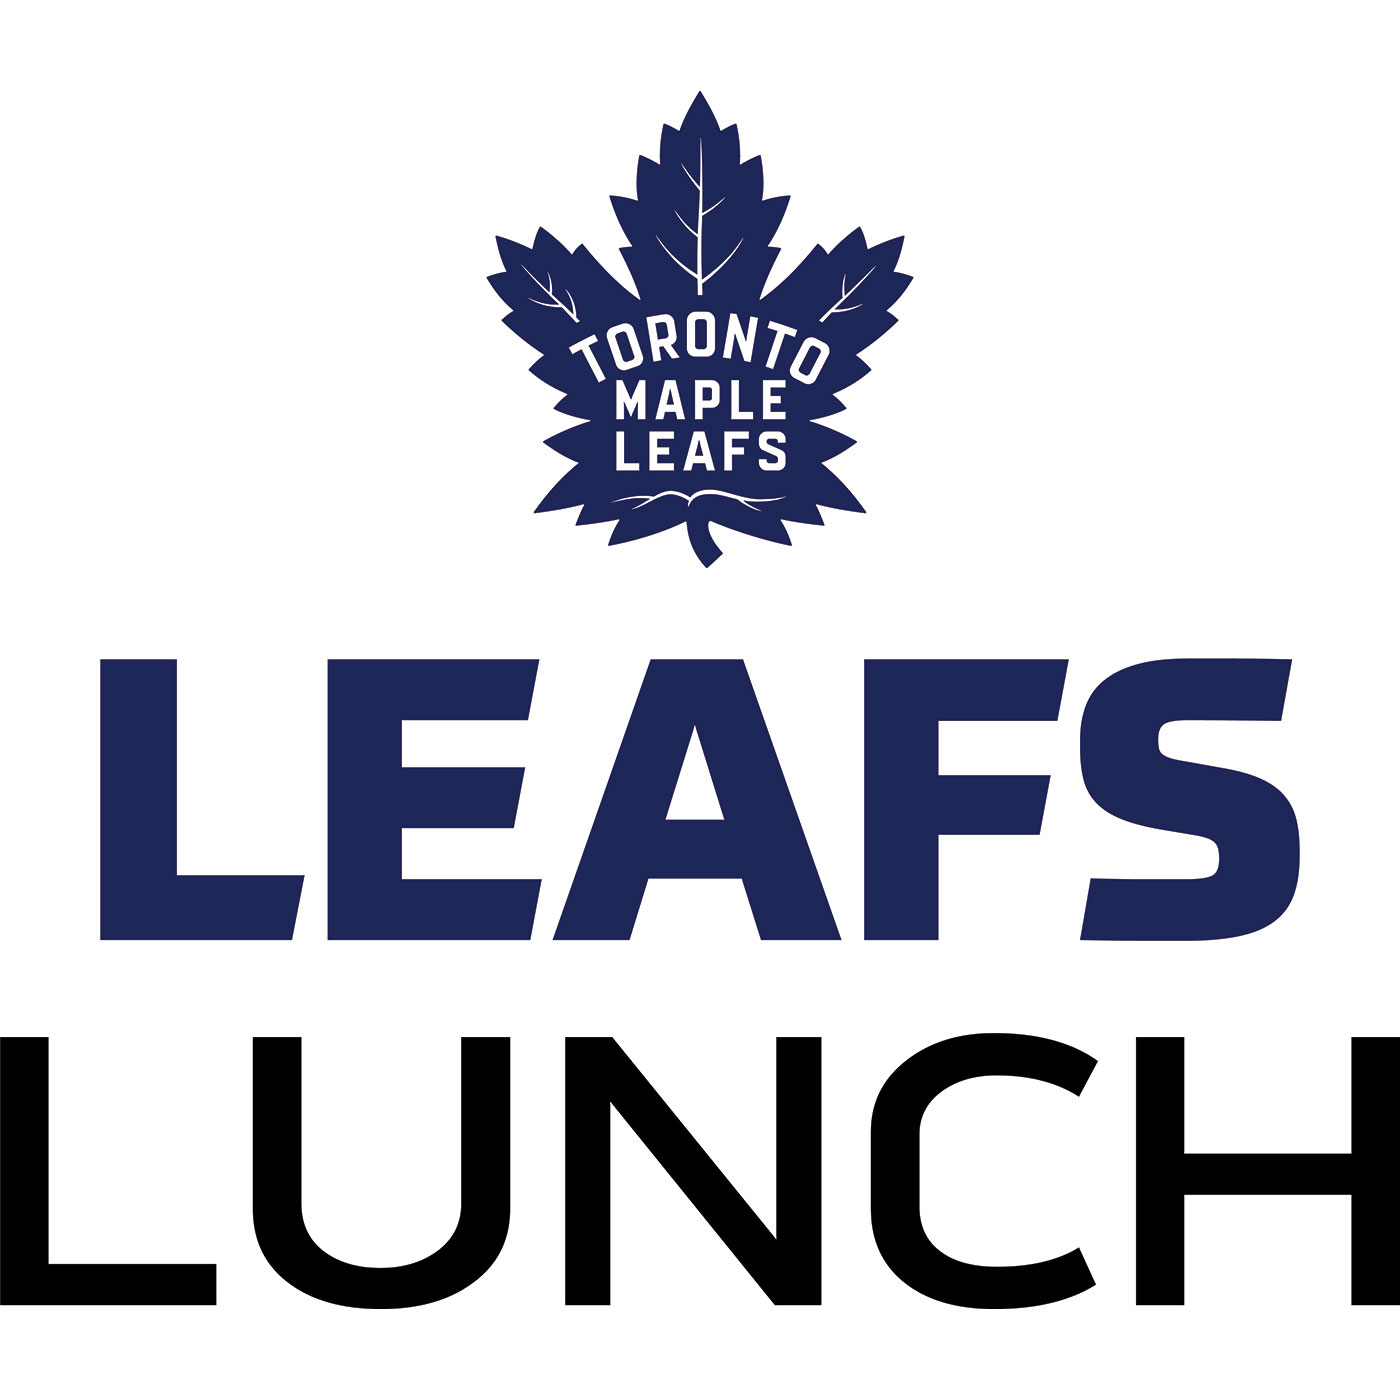 Eakins on the Leafs' addition of Doan: He's a huge get for the organization and Treliving